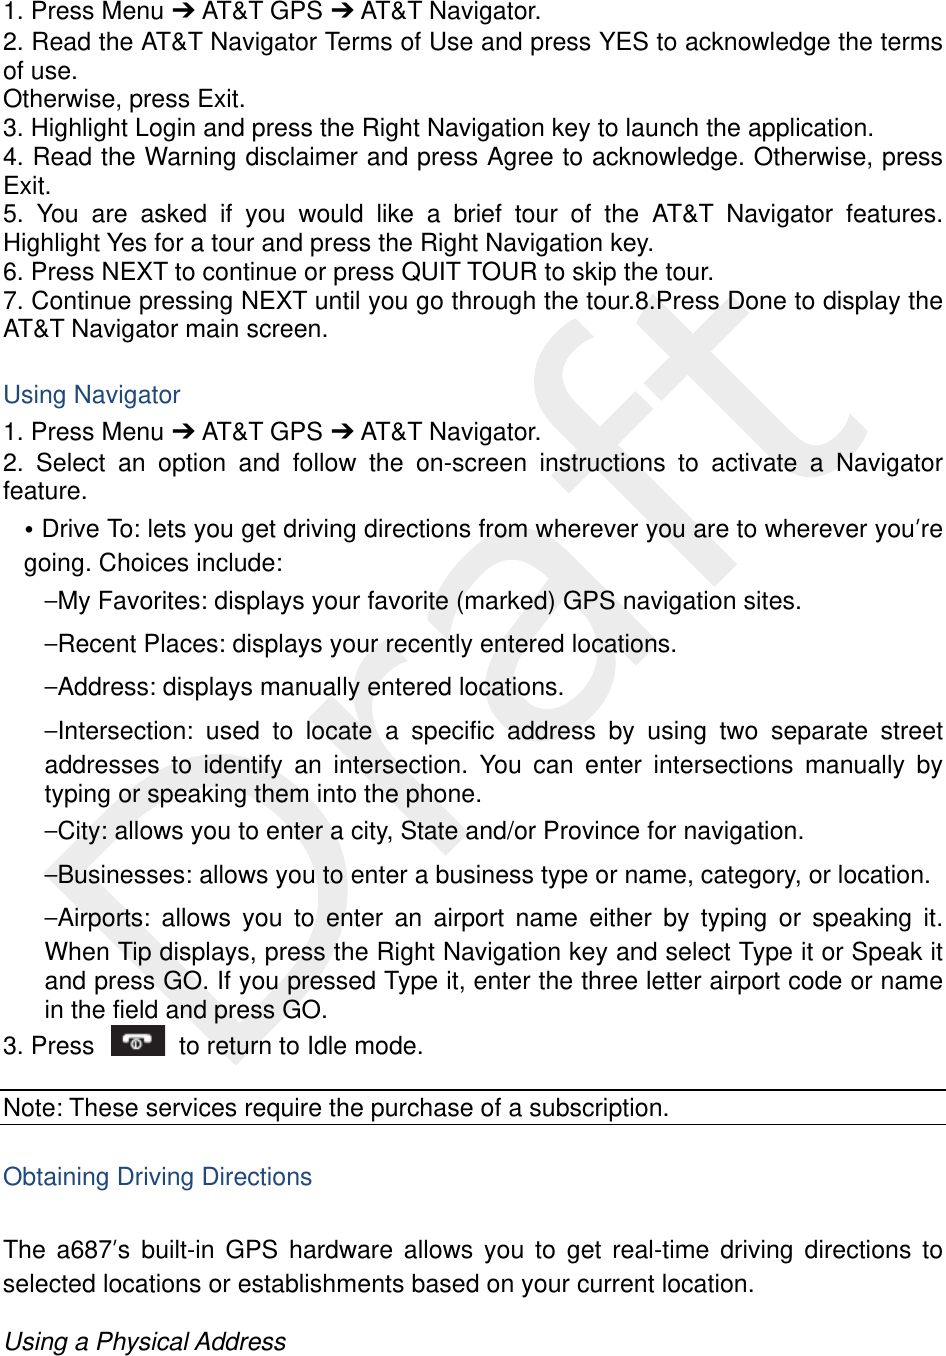   1. Press Menu ➔ AT&amp;T GPS ➔ AT&amp;T Navigator. 2. Read the AT&amp;T Navigator Terms of Use and press YES to acknowledge the terms of use.   Otherwise, press Exit. 3. Highlight Login and press the Right Navigation key to launch the application. 4. Read the Warning disclaimer and press Agree to acknowledge. Otherwise, press Exit. 5. You are asked if you would like a brief tour of the AT&amp;T Navigator features. Highlight Yes for a tour and press the Right Navigation key. 6. Press NEXT to continue or press QUIT TOUR to skip the tour. 7. Continue pressing NEXT until you go through the tour.8.Press Done to display the AT&amp;T Navigator main screen.  Using Navigator 1. Press Menu ➔ AT&amp;T GPS ➔ AT&amp;T Navigator. 2. Select an option and follow the on-screen instructions to activate a Navigator feature. • Drive To: lets you get driving directions from wherever you are to wherever you’re going. Choices include: –My Favorites: displays your favorite (marked) GPS navigation sites. –Recent Places: displays your recently entered locations. –Address: displays manually entered locations. –Intersection: used to locate a specific address by using two separate street addresses to identify an intersection. You can enter intersections manually by typing or speaking them into the phone. –City: allows you to enter a city, State and/or Province for navigation. –Businesses: allows you to enter a business type or name, category, or location. –Airports: allows you to enter an airport name either by typing or speaking it. When Tip displays, press the Right Navigation key and select Type it or Speak it and press GO. If you pressed Type it, enter the three letter airport code or name in the field and press GO. 3. Press    to return to Idle mode.  Note: These services require the purchase of a subscription.  Obtaining Driving Directions  The a687’s built-in GPS hardware allows you to get real-time driving directions to selected locations or establishments based on your current location.  Using a Physical Address  